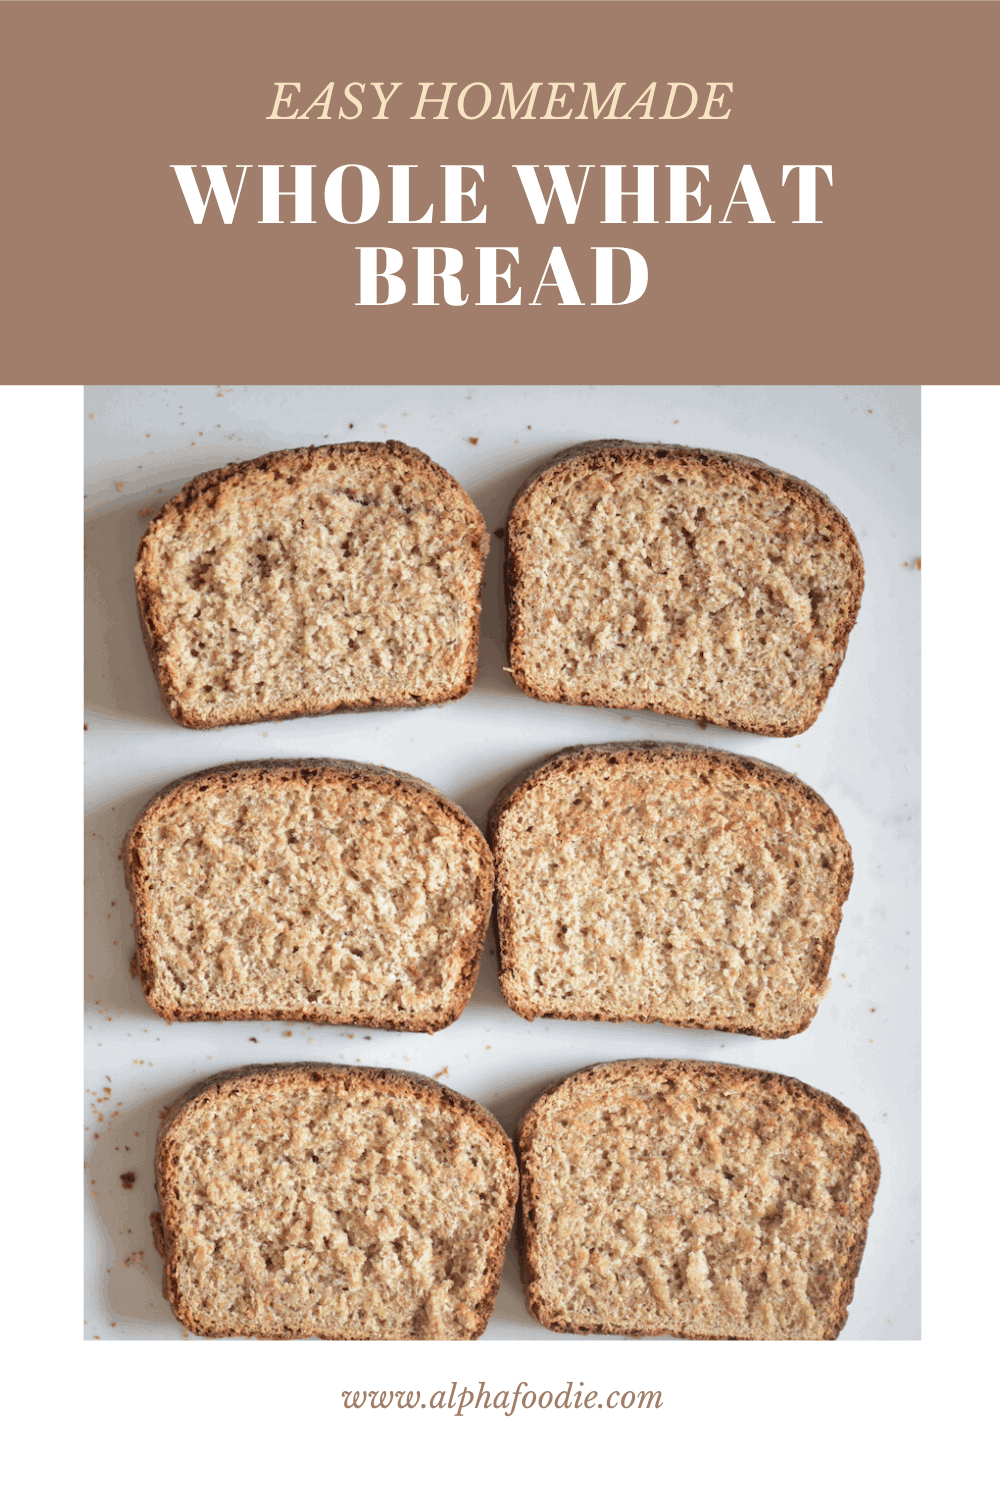 How to make Whole Wheat Bread at home - Alphafoodie